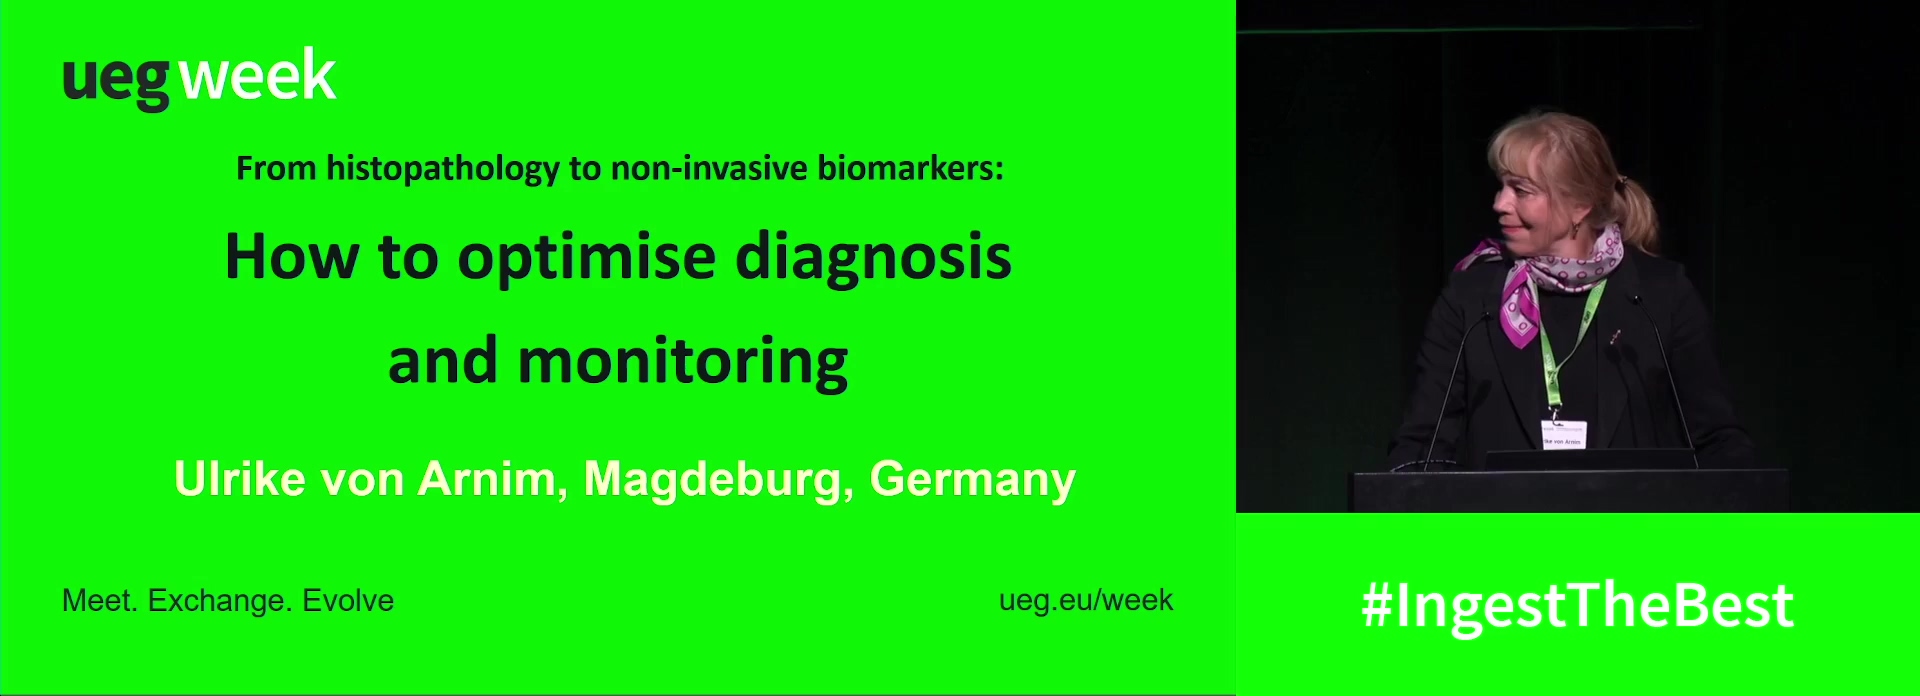 From histopathology to non-invasive biomarkers: How to optimise diagnosis and monitoring